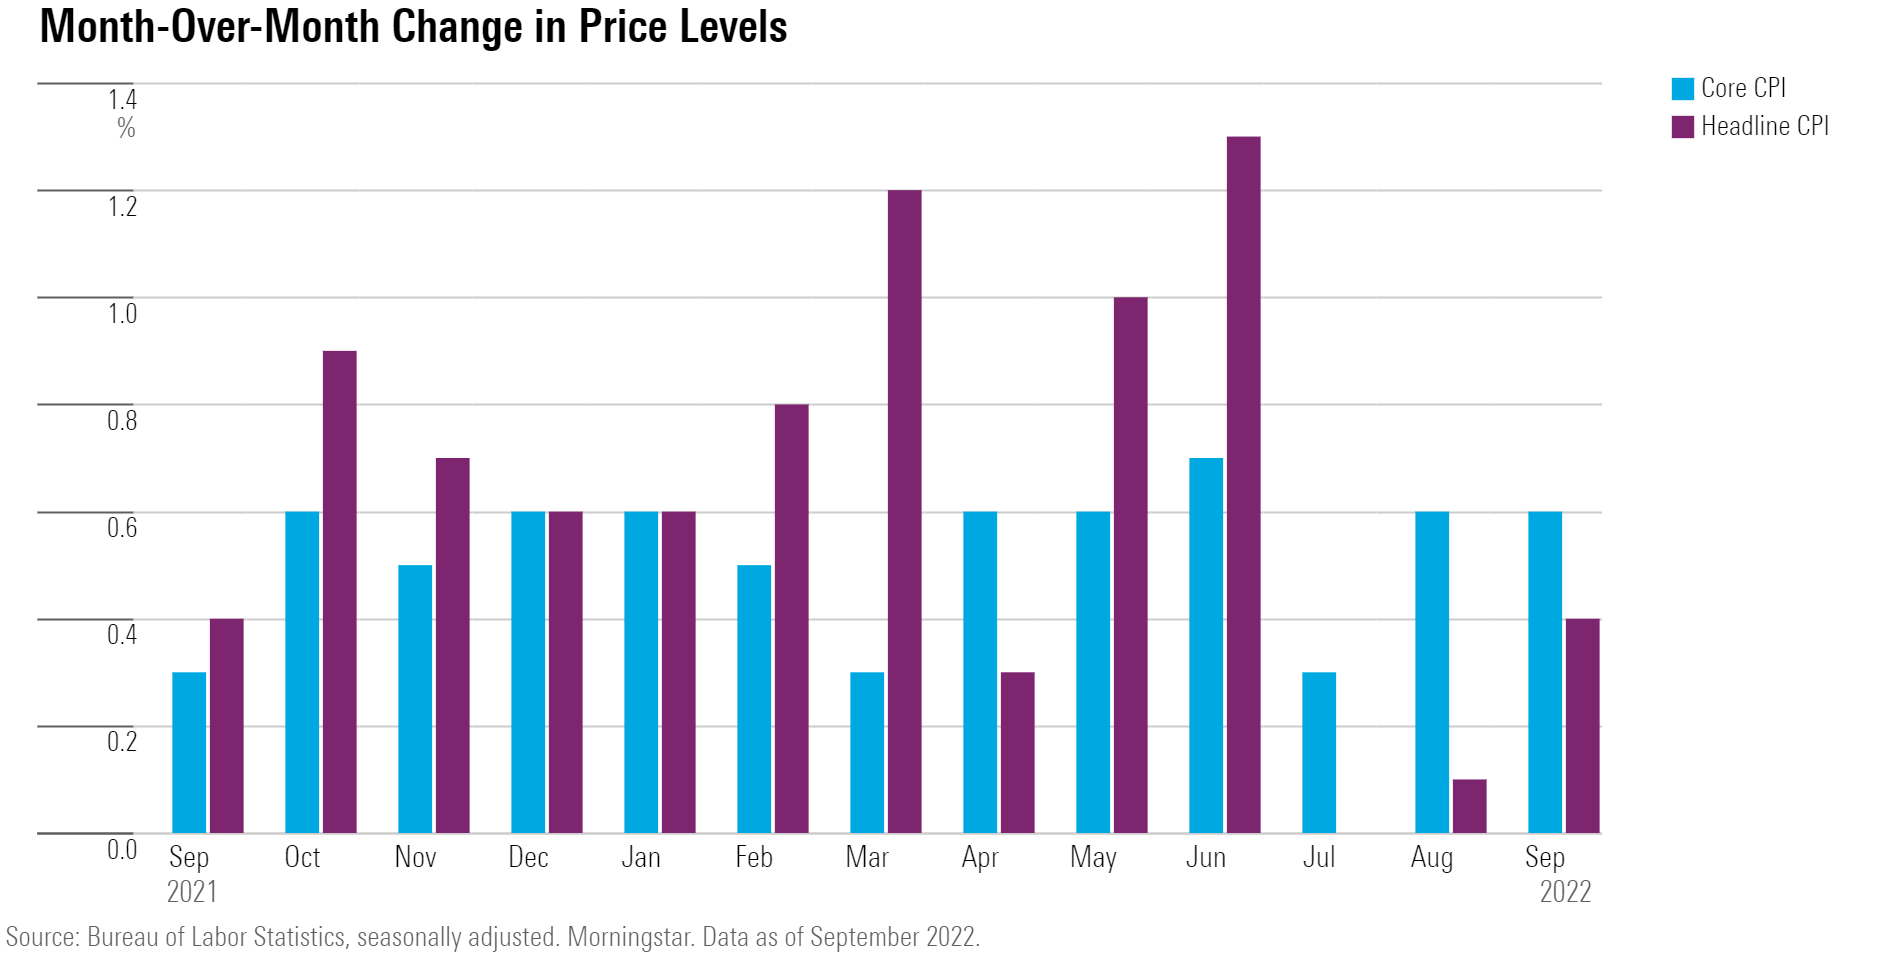 Month-over-month changes in price levels for Core CPI and Headline CPI through September 2022.